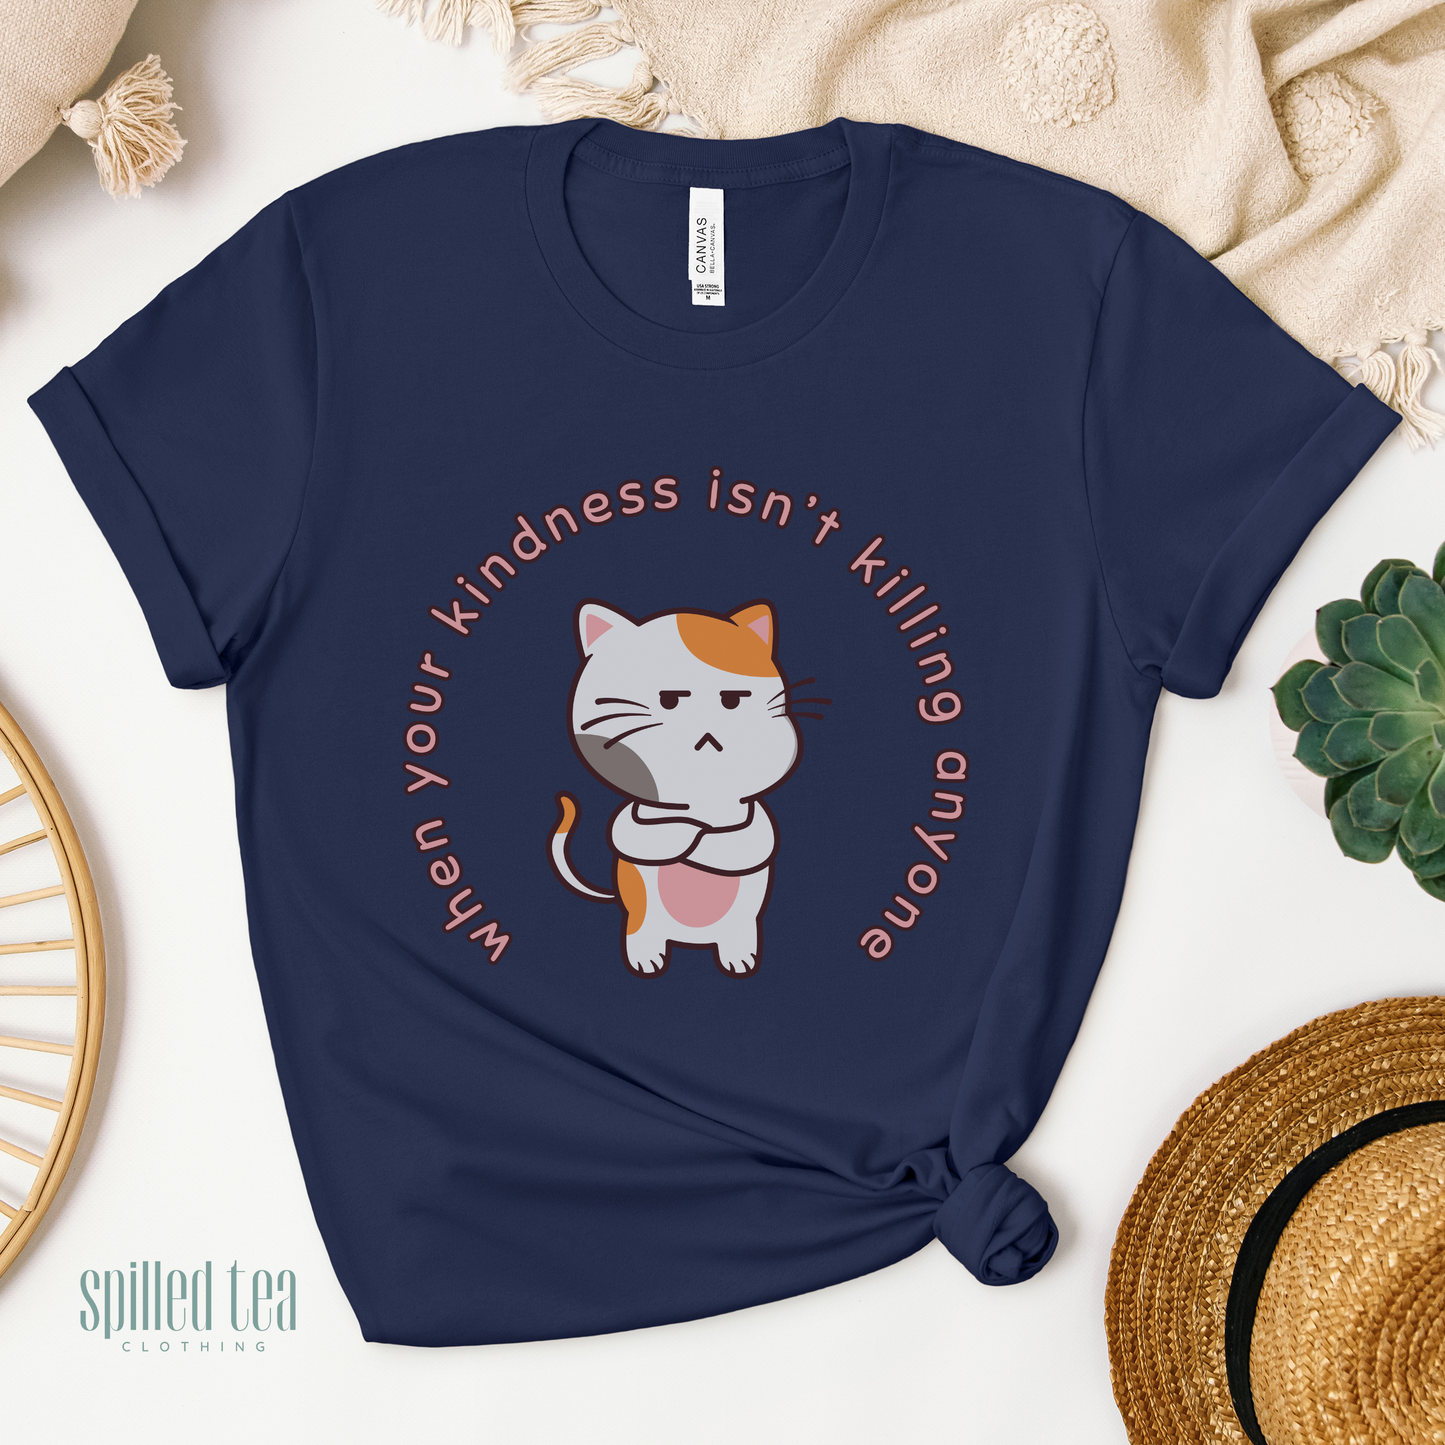 When Your Kindness Isn't Killing Anyone T-Shirt